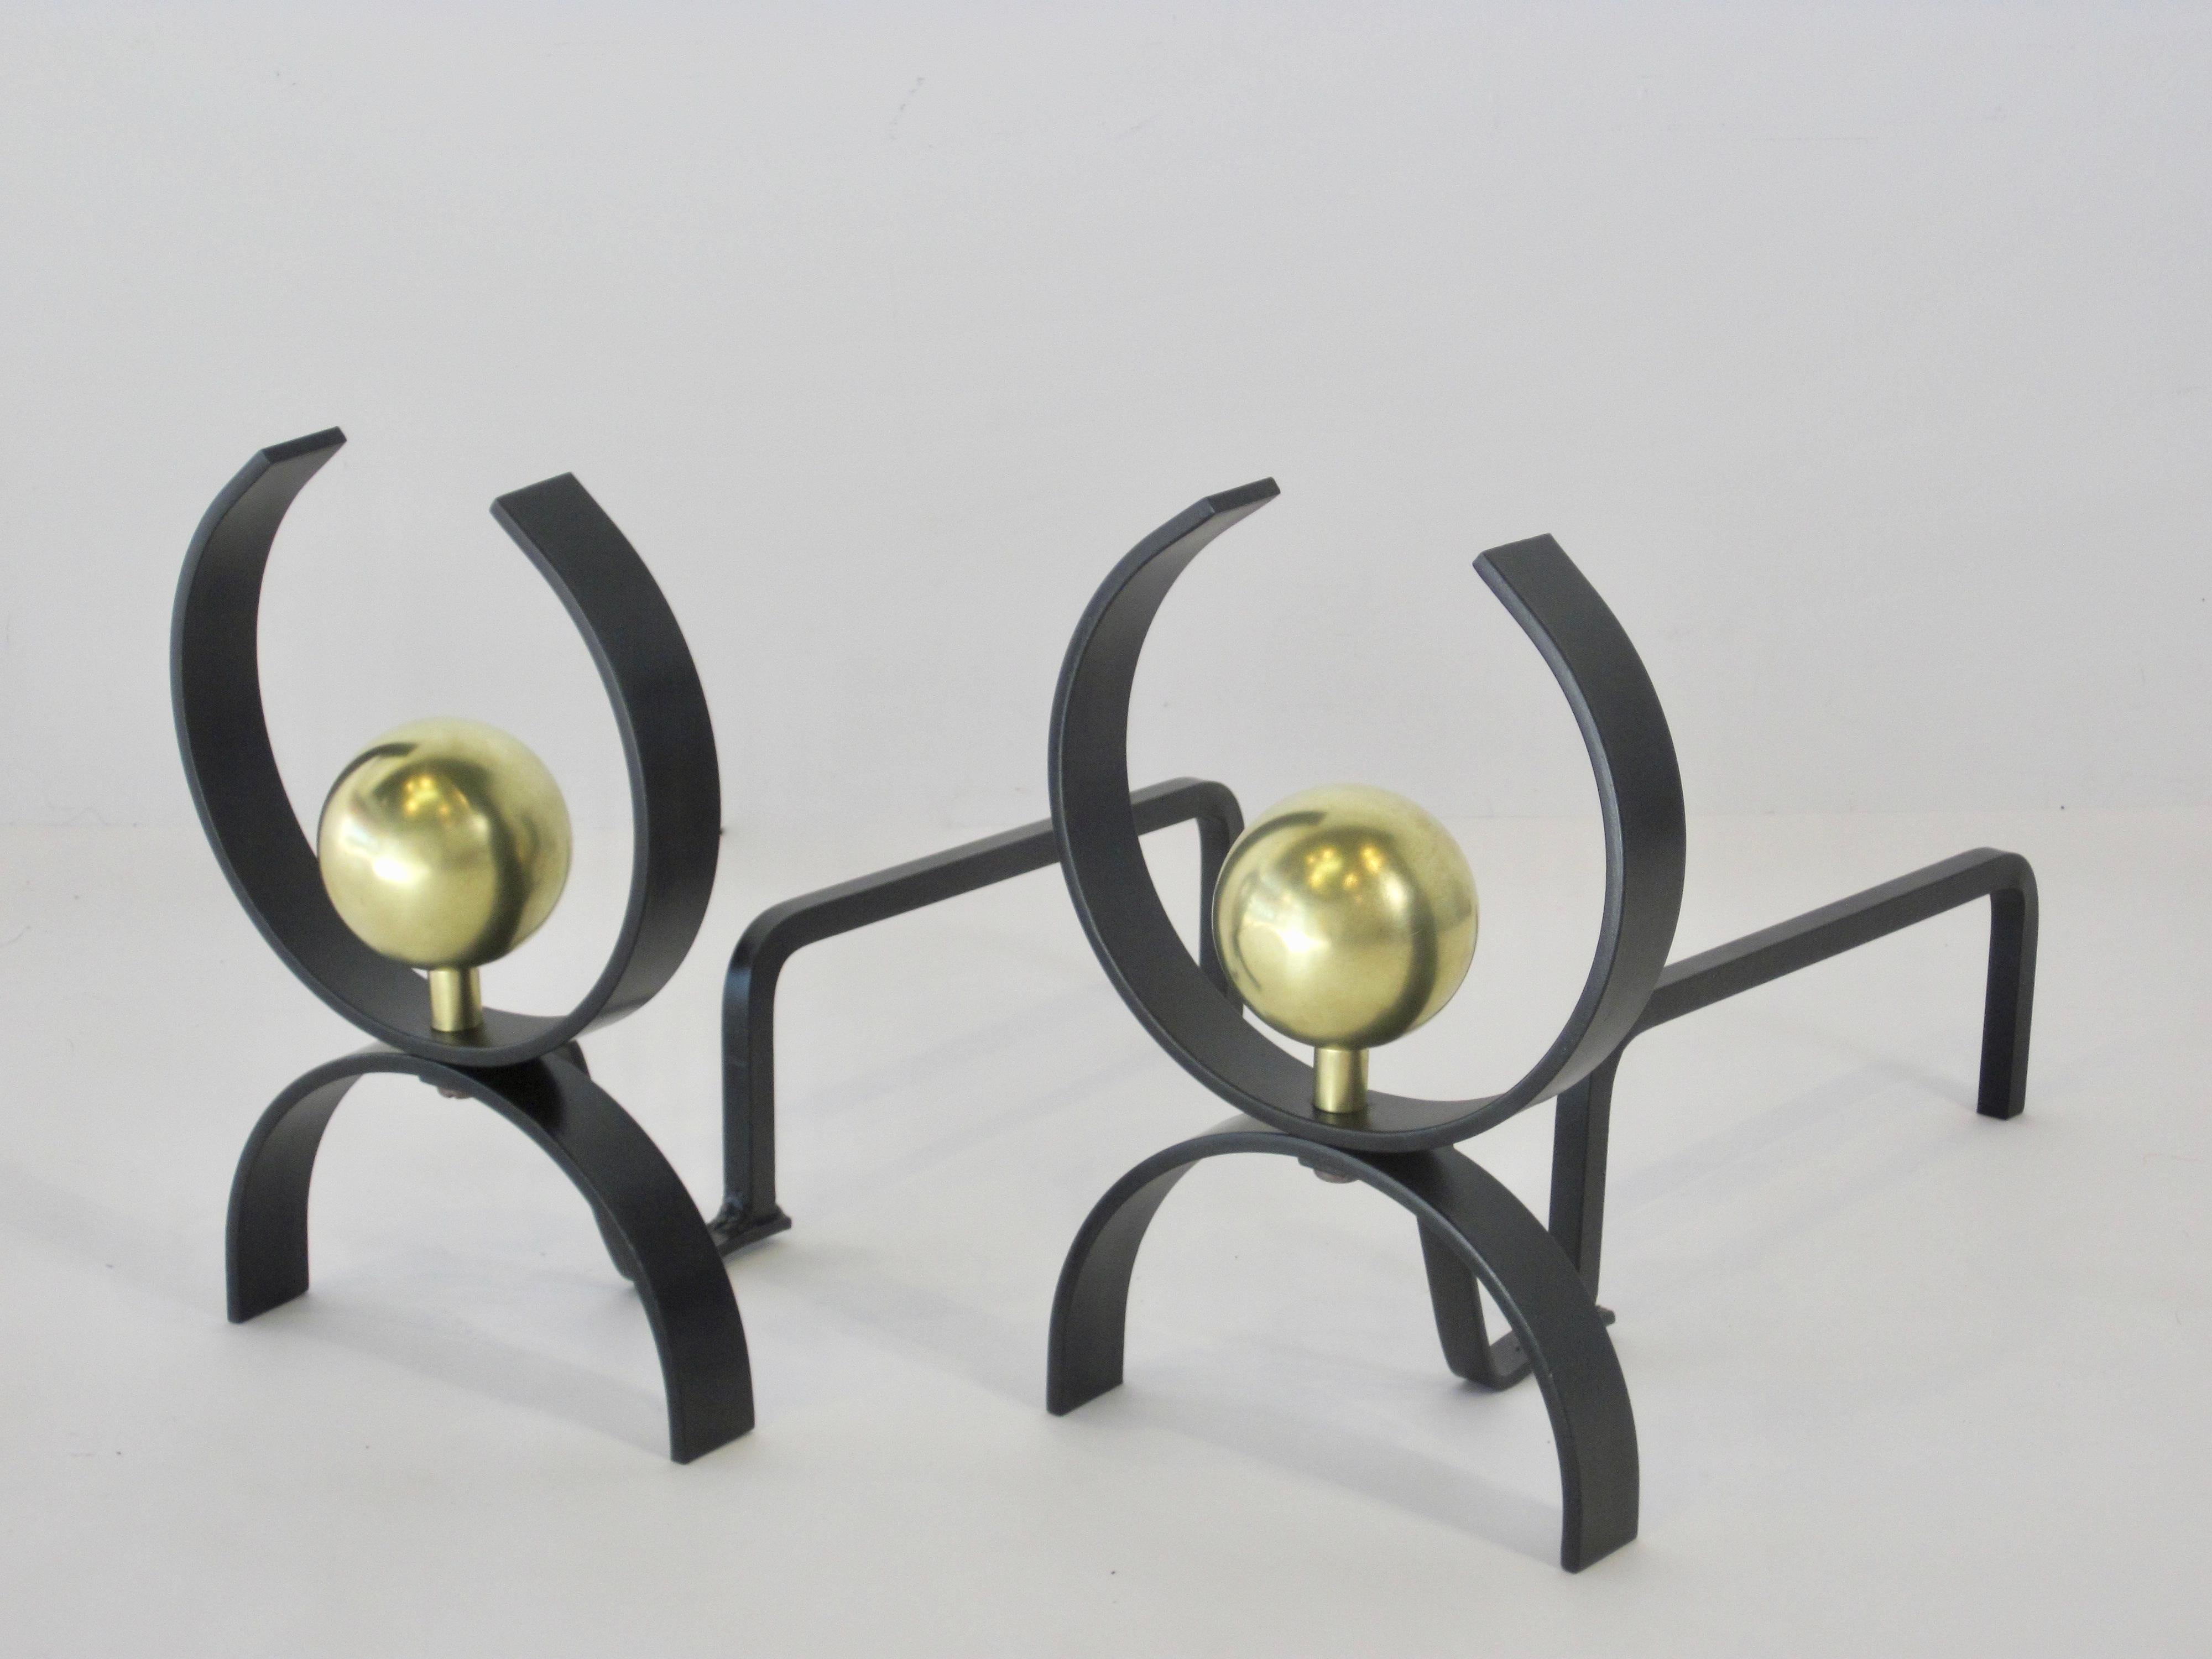 A pair of Art Deco style black iron and brushed brass concentric fireplace andirons by Donald Deskey. c.1950s 
Grosse Pointe, Michigan provenance.